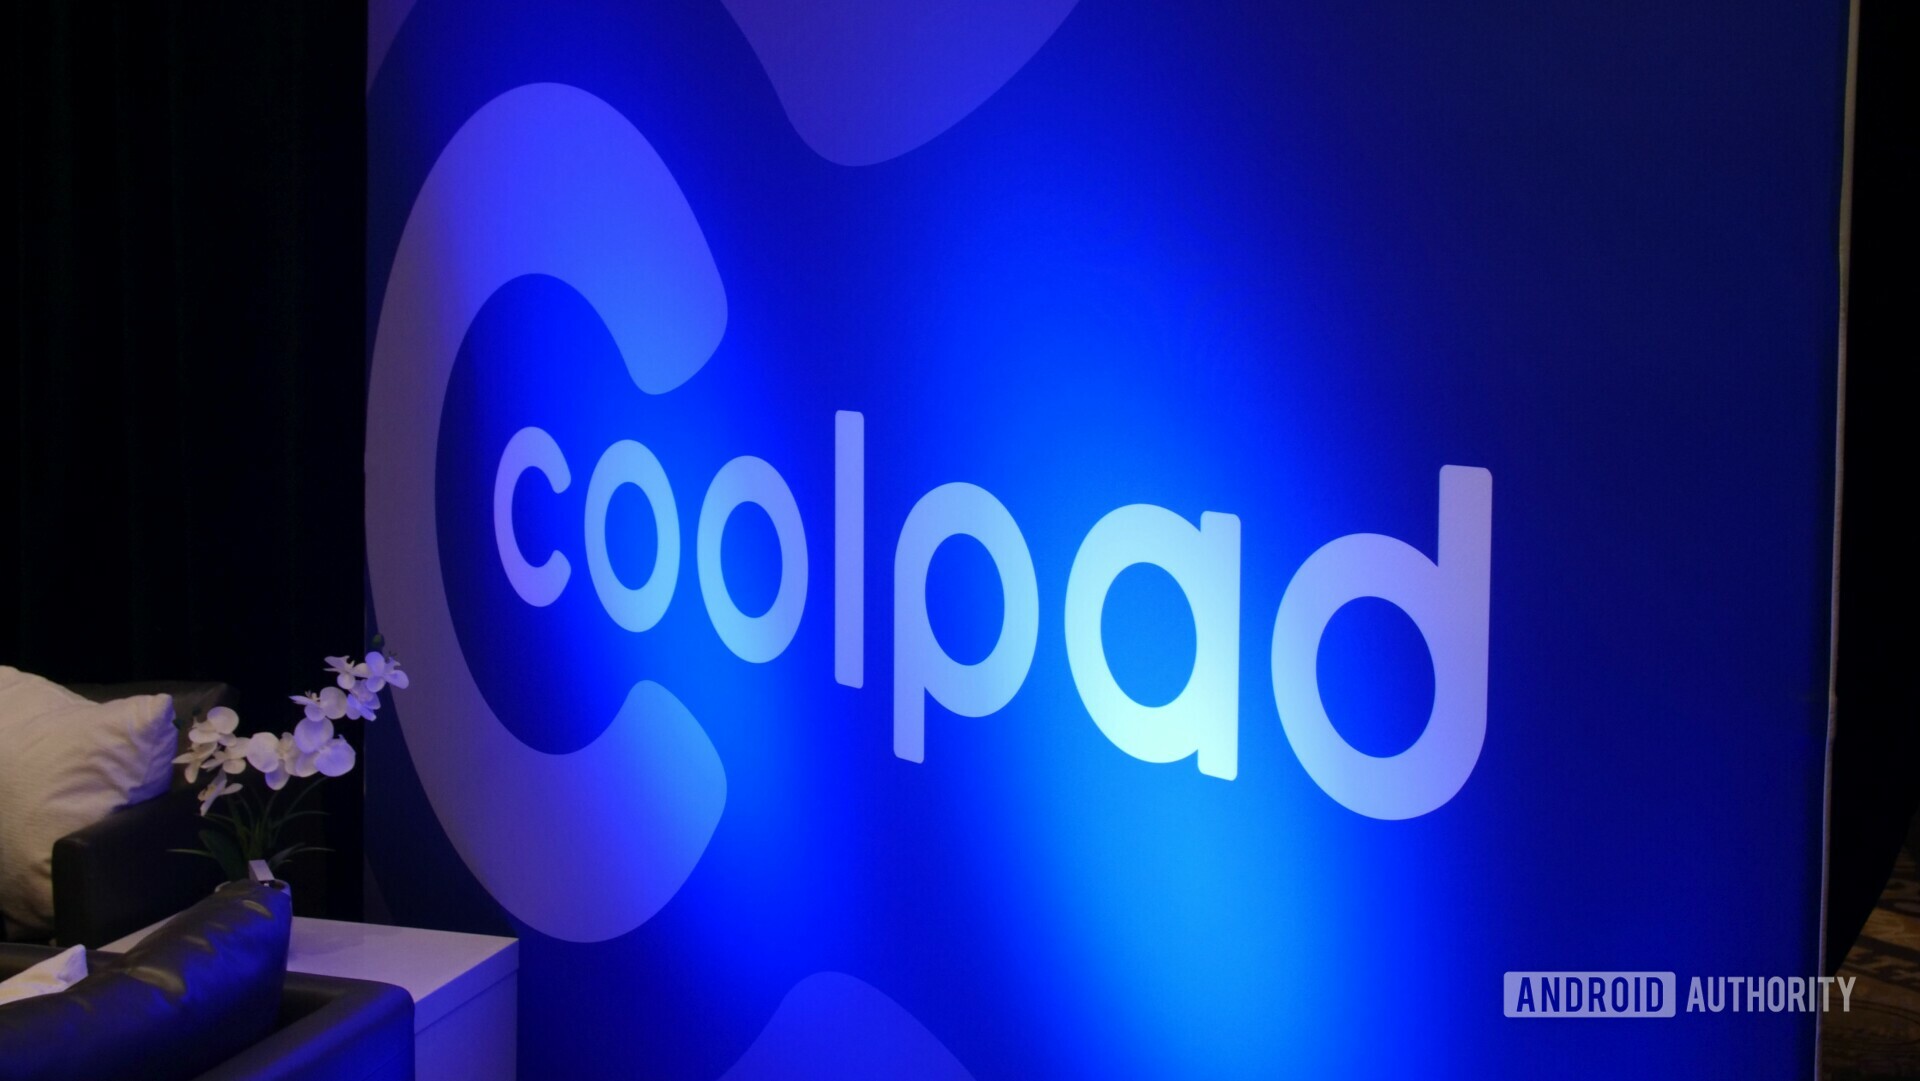 How Much is a Coolpad Phone Worth